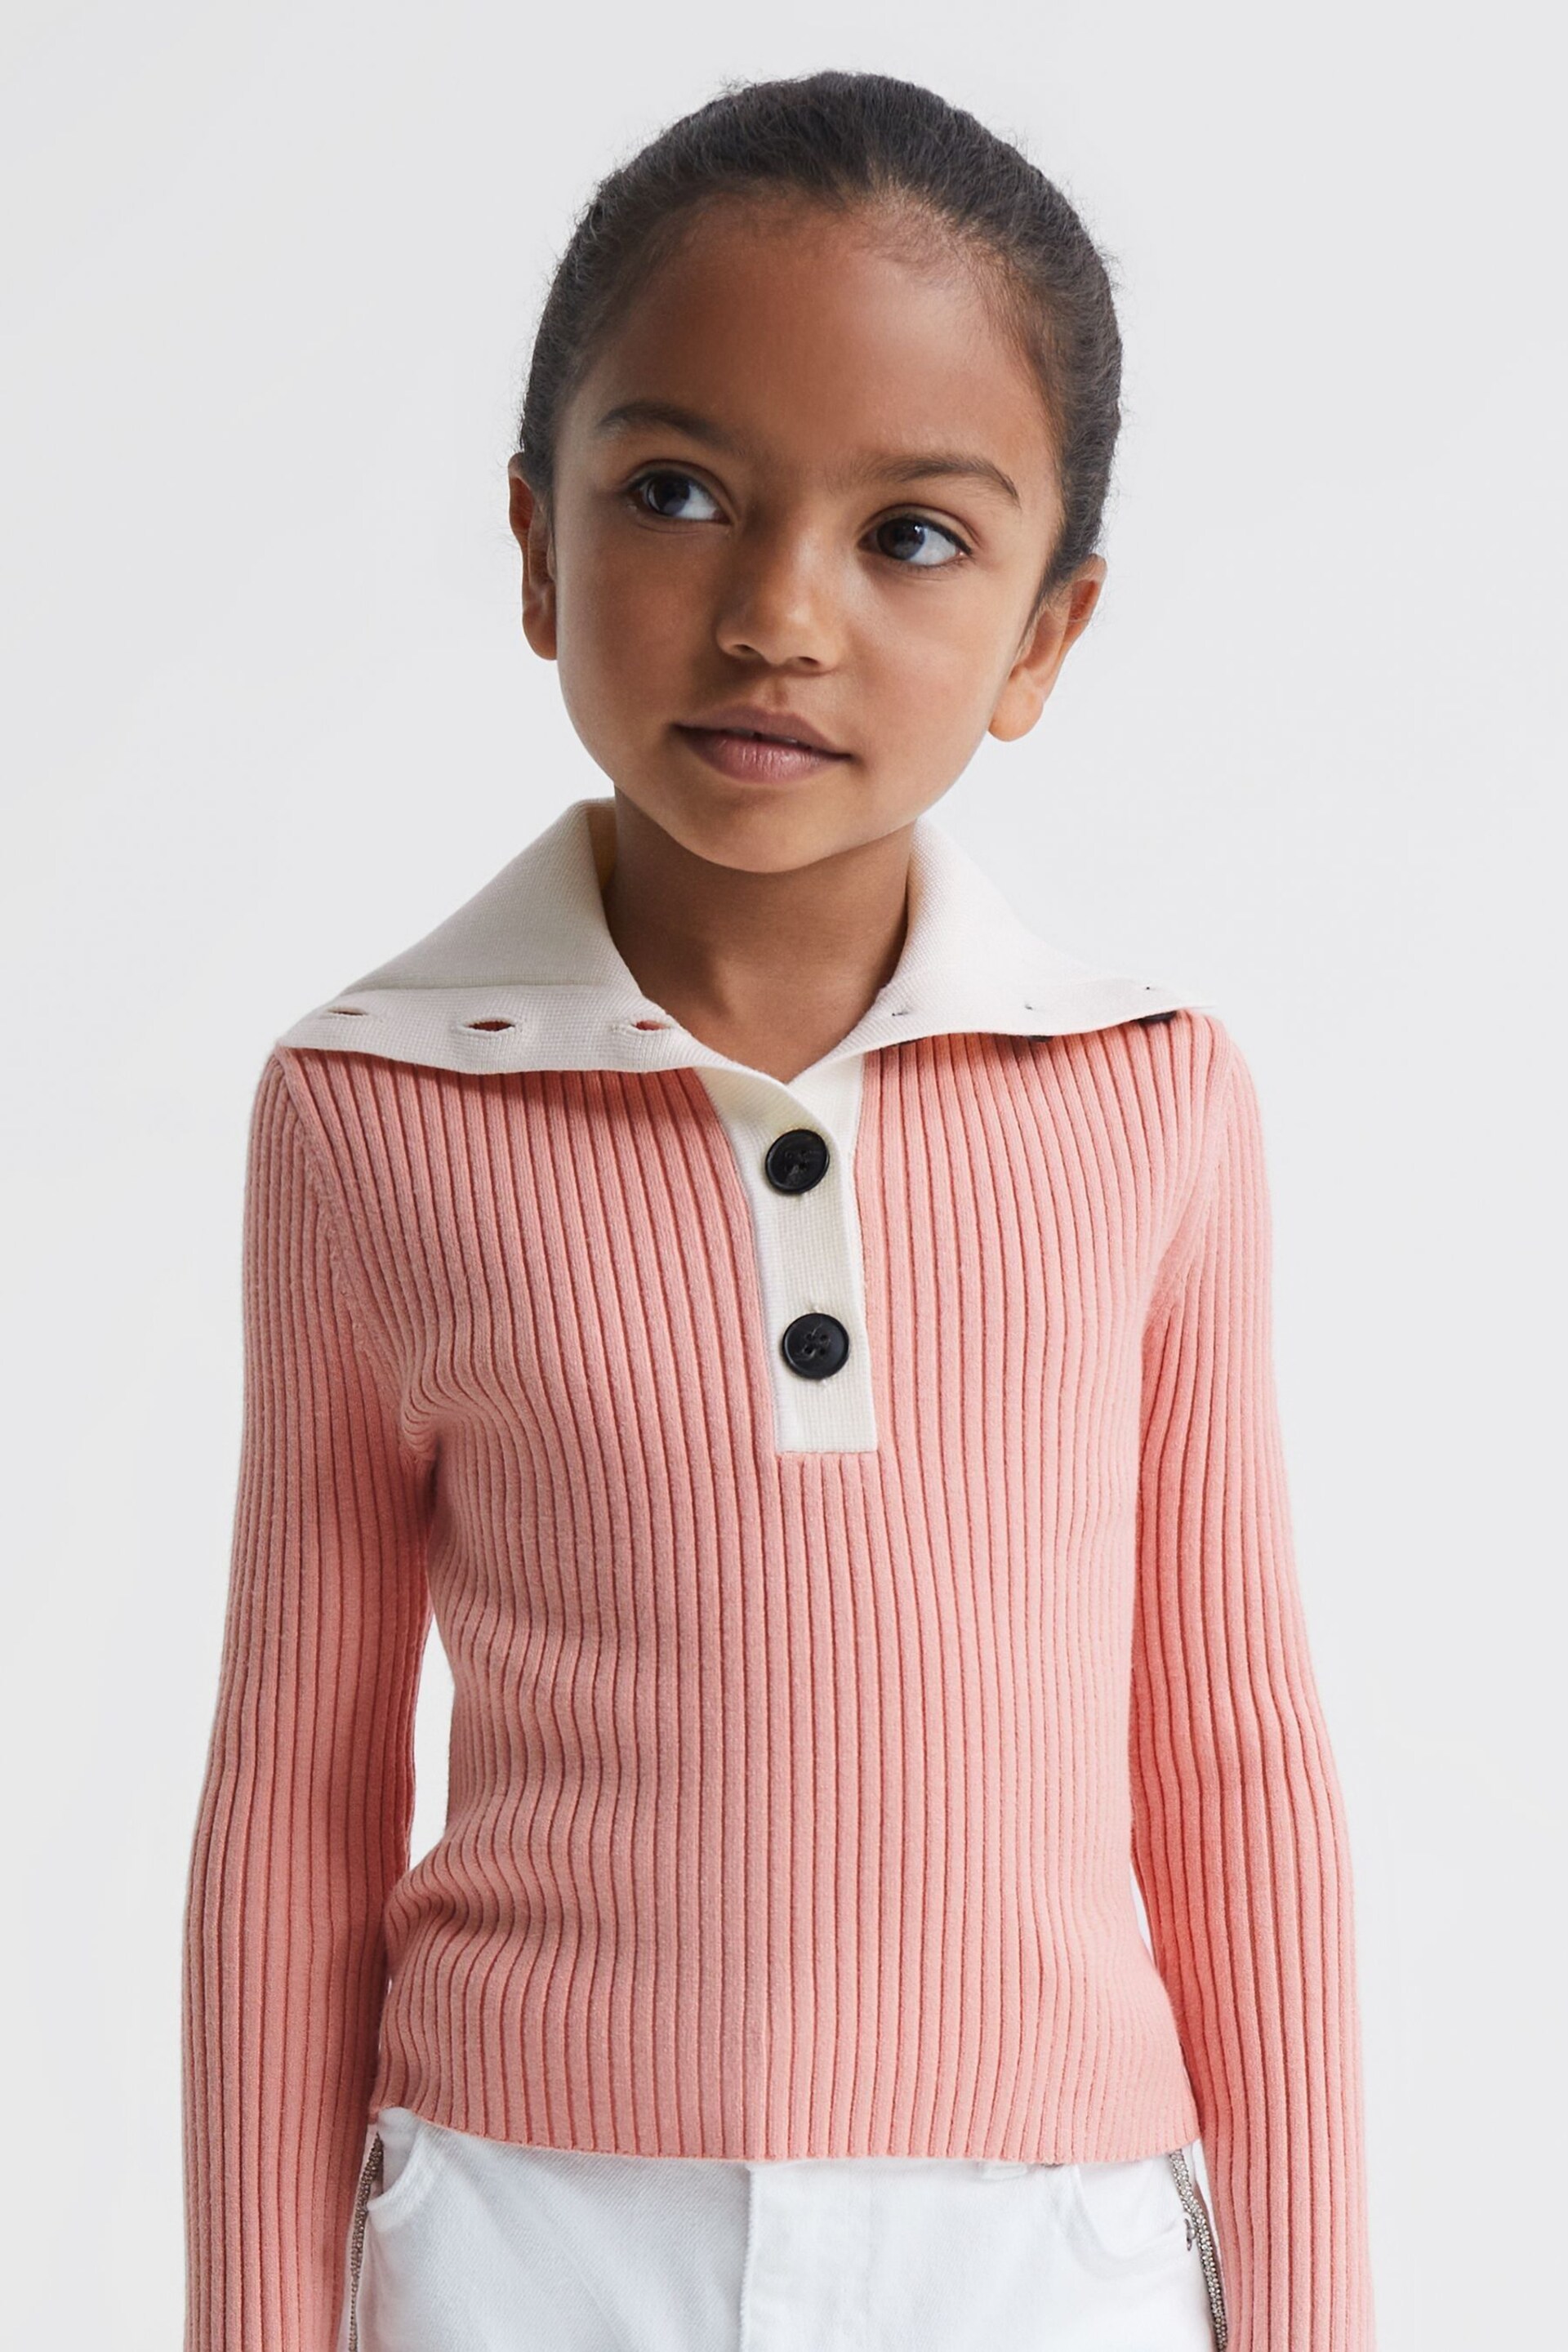 Reiss Pink Maia Junior Colourblock Knitted Top - Image 1 of 6